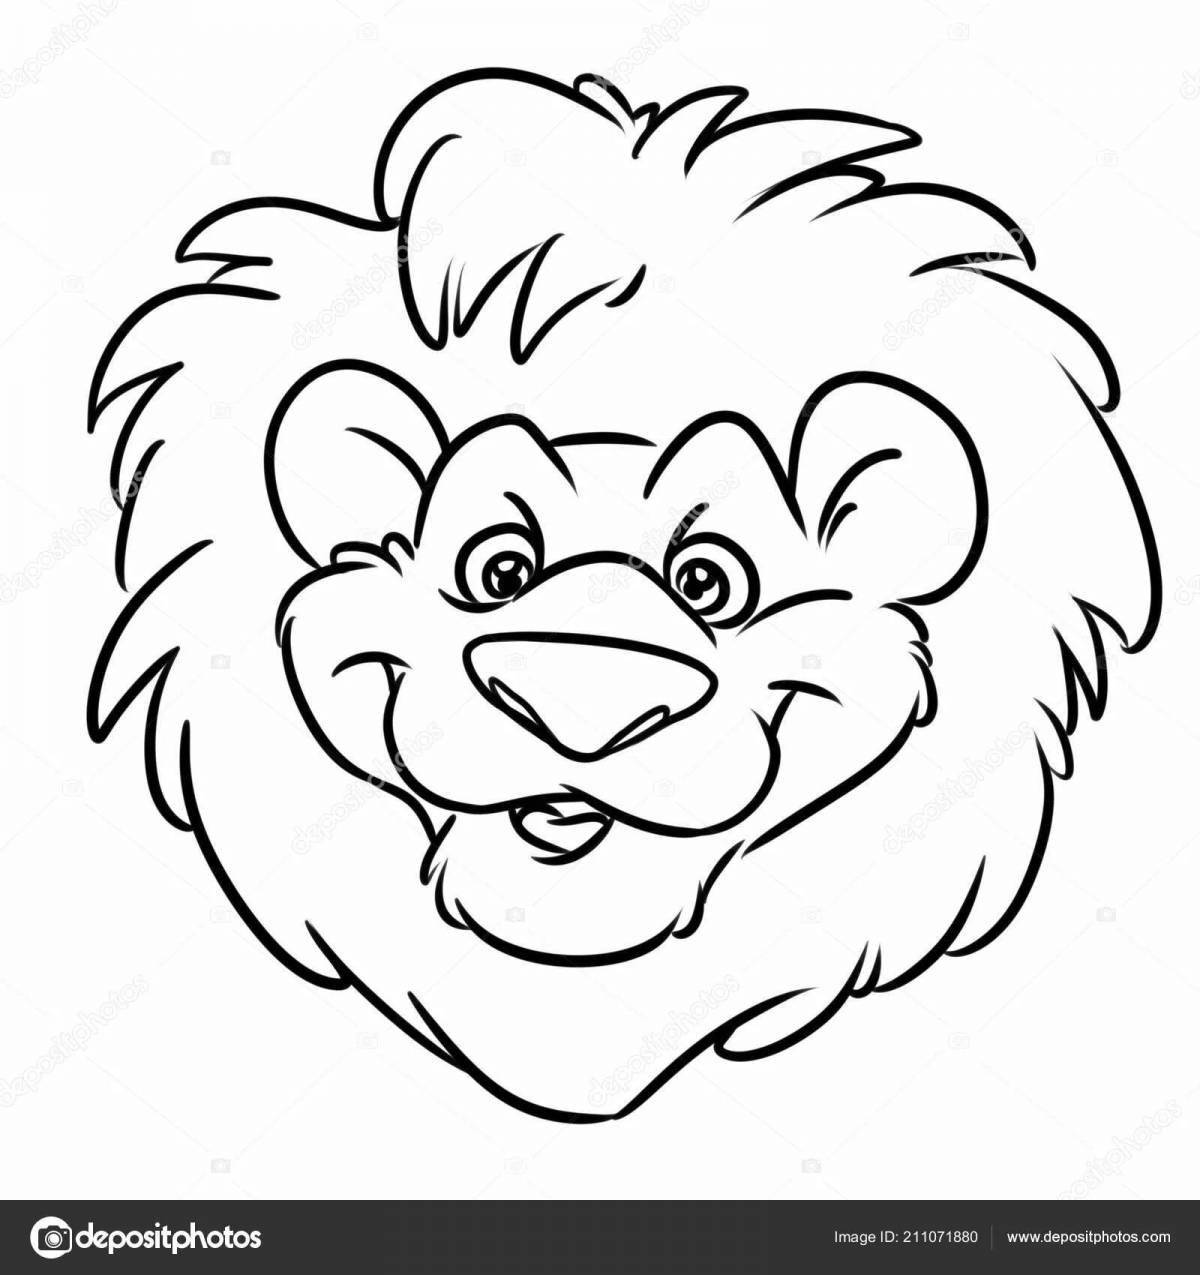 Coloring page dazzling muzzle of a lion